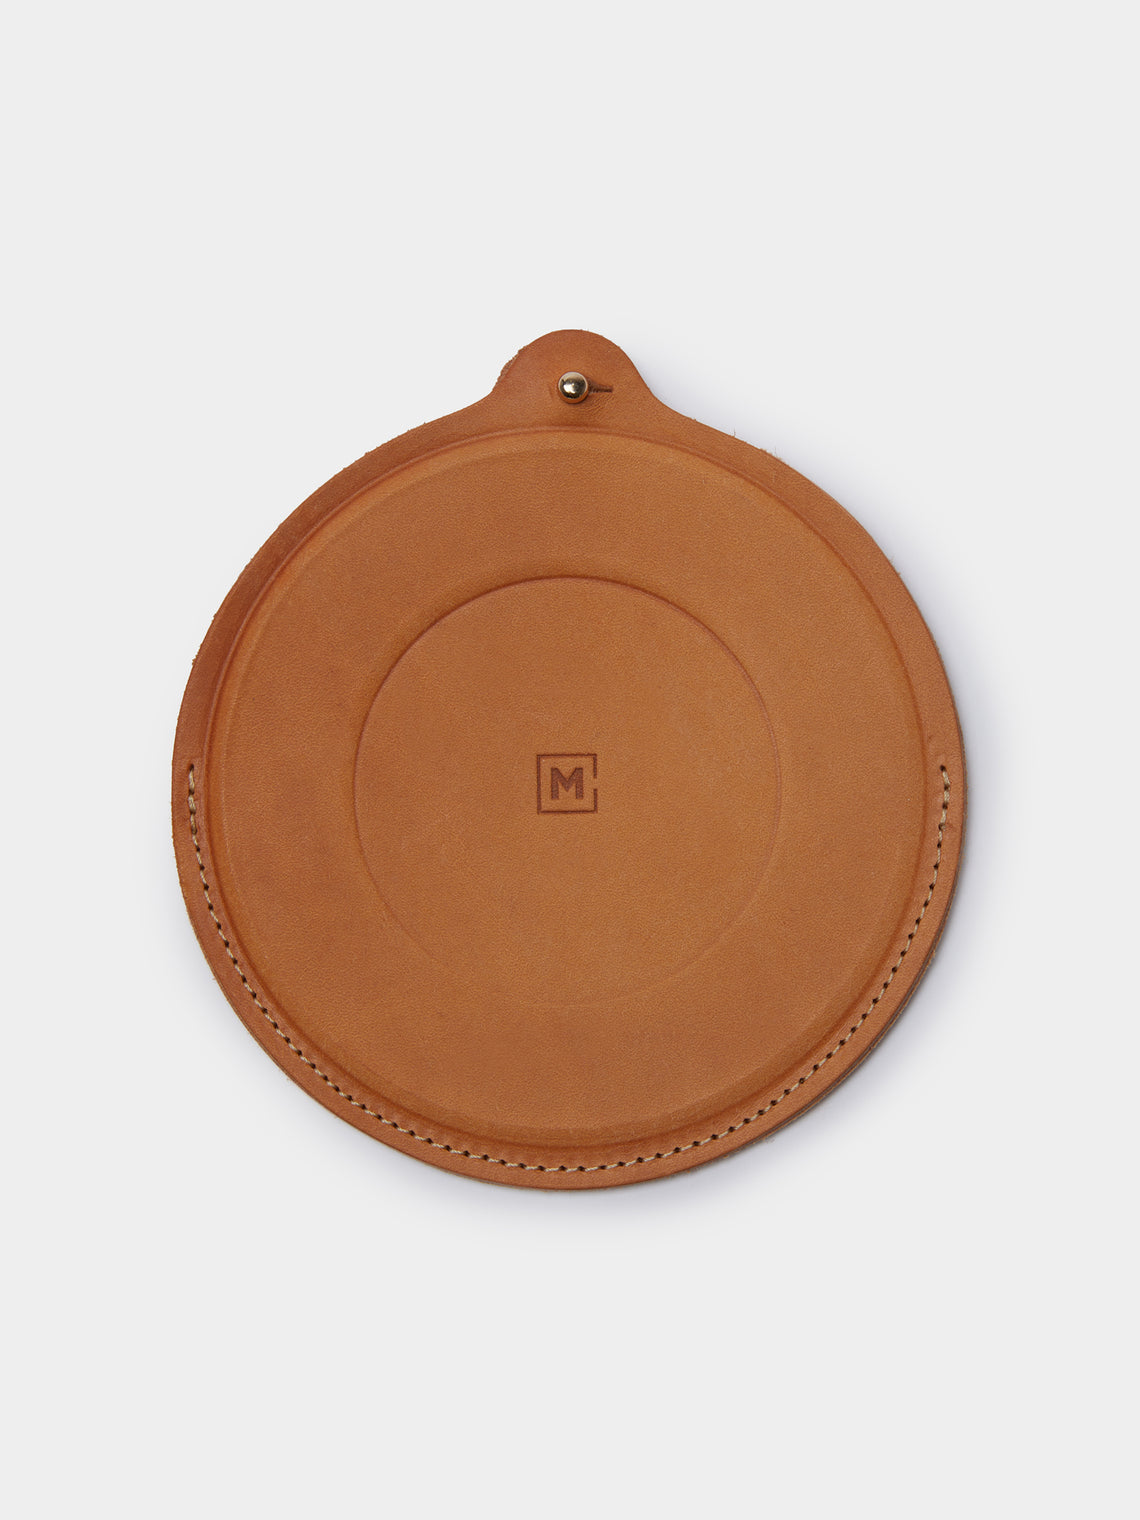 Makers Cabinet - Iris Leather Case - Tan - ABASK - 